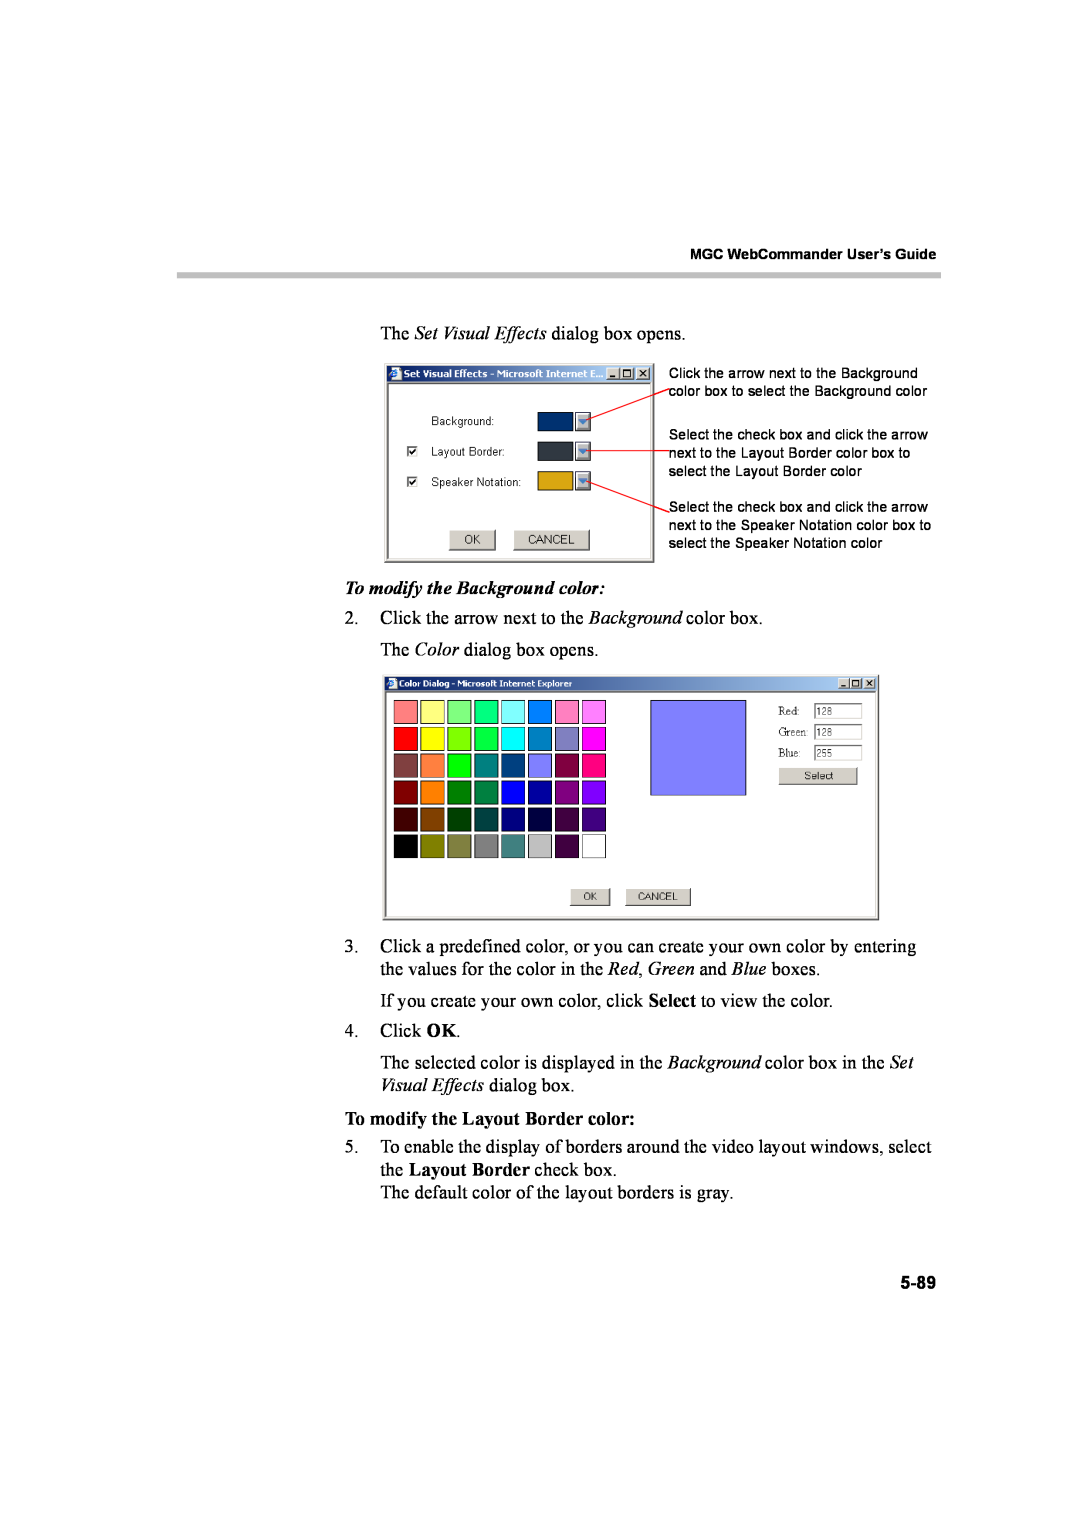 Polycom 8 manual To modify the Background color, To modify the Layout Border color 